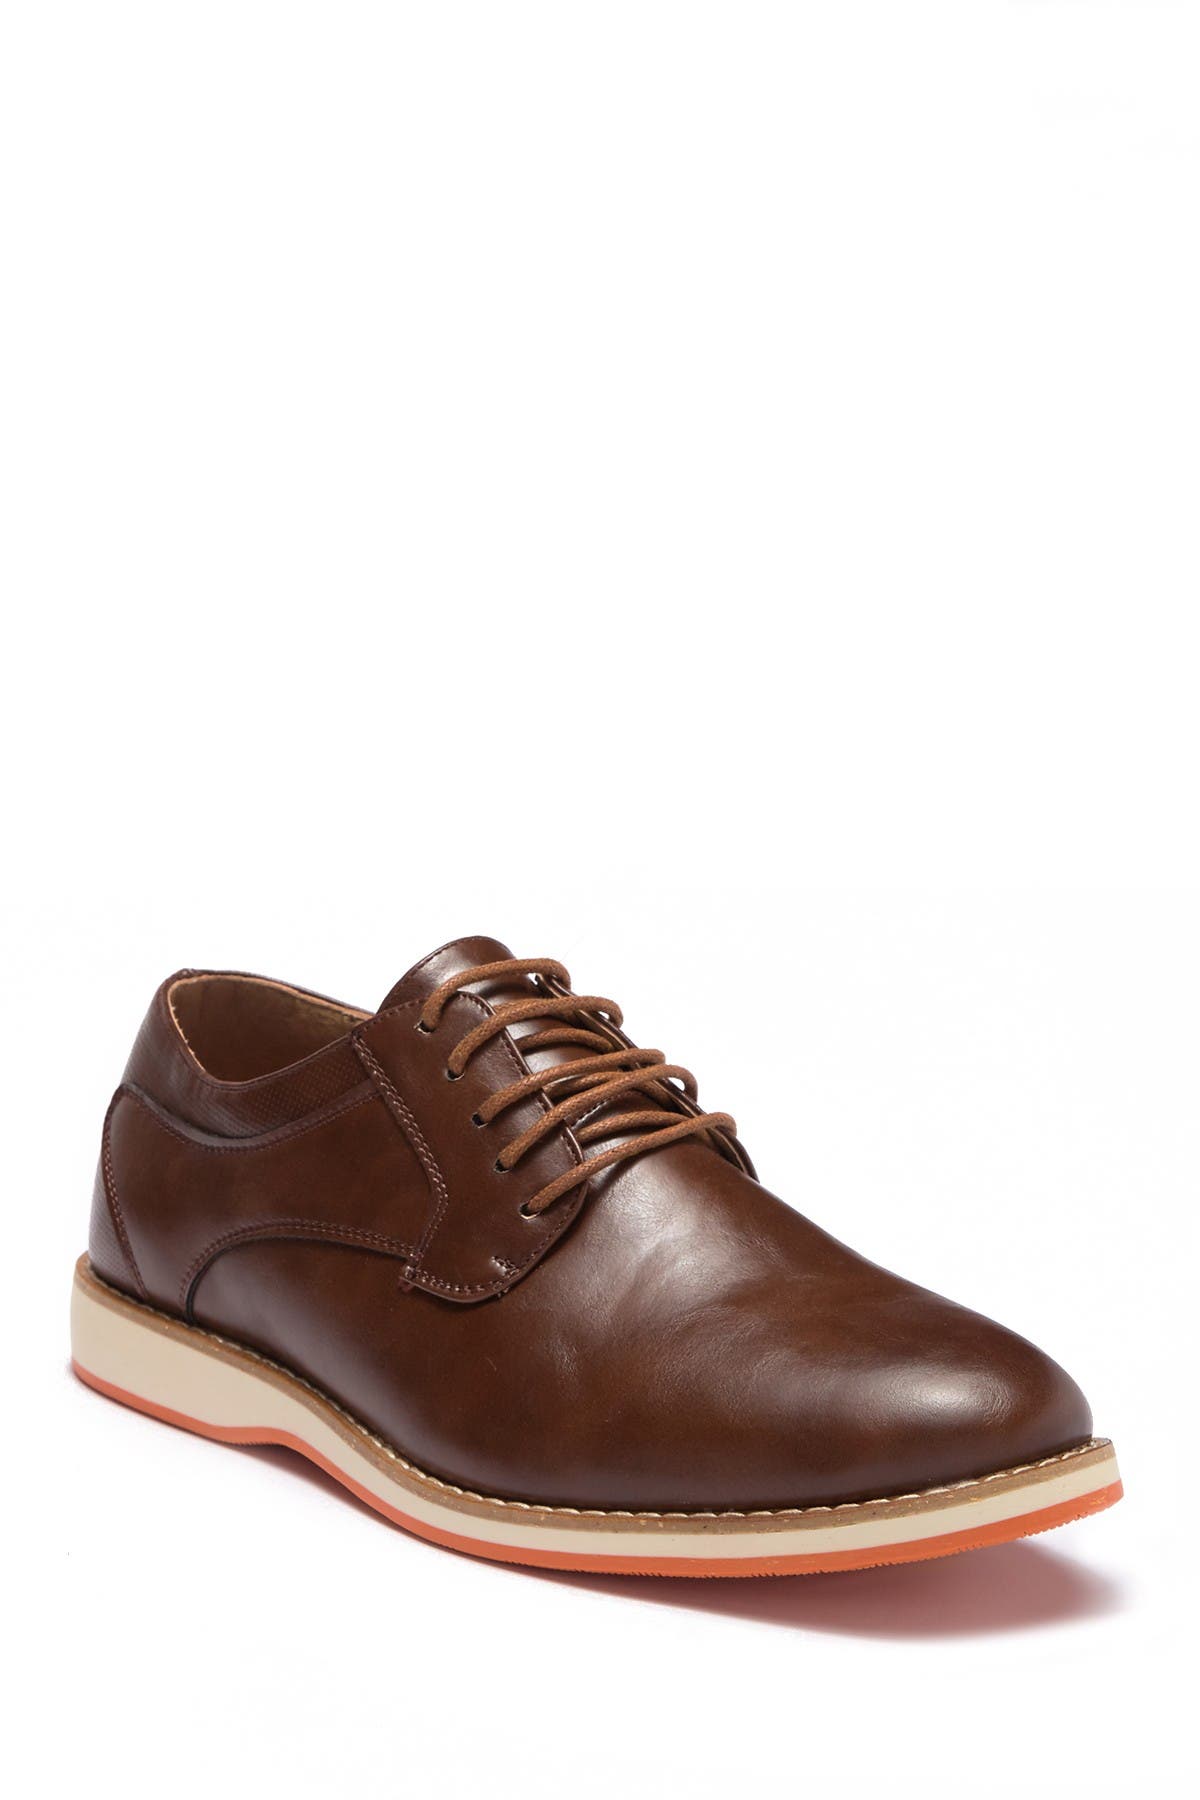 Hawke & Co. Albert Lace-up Leather Derby In Dark Brown8